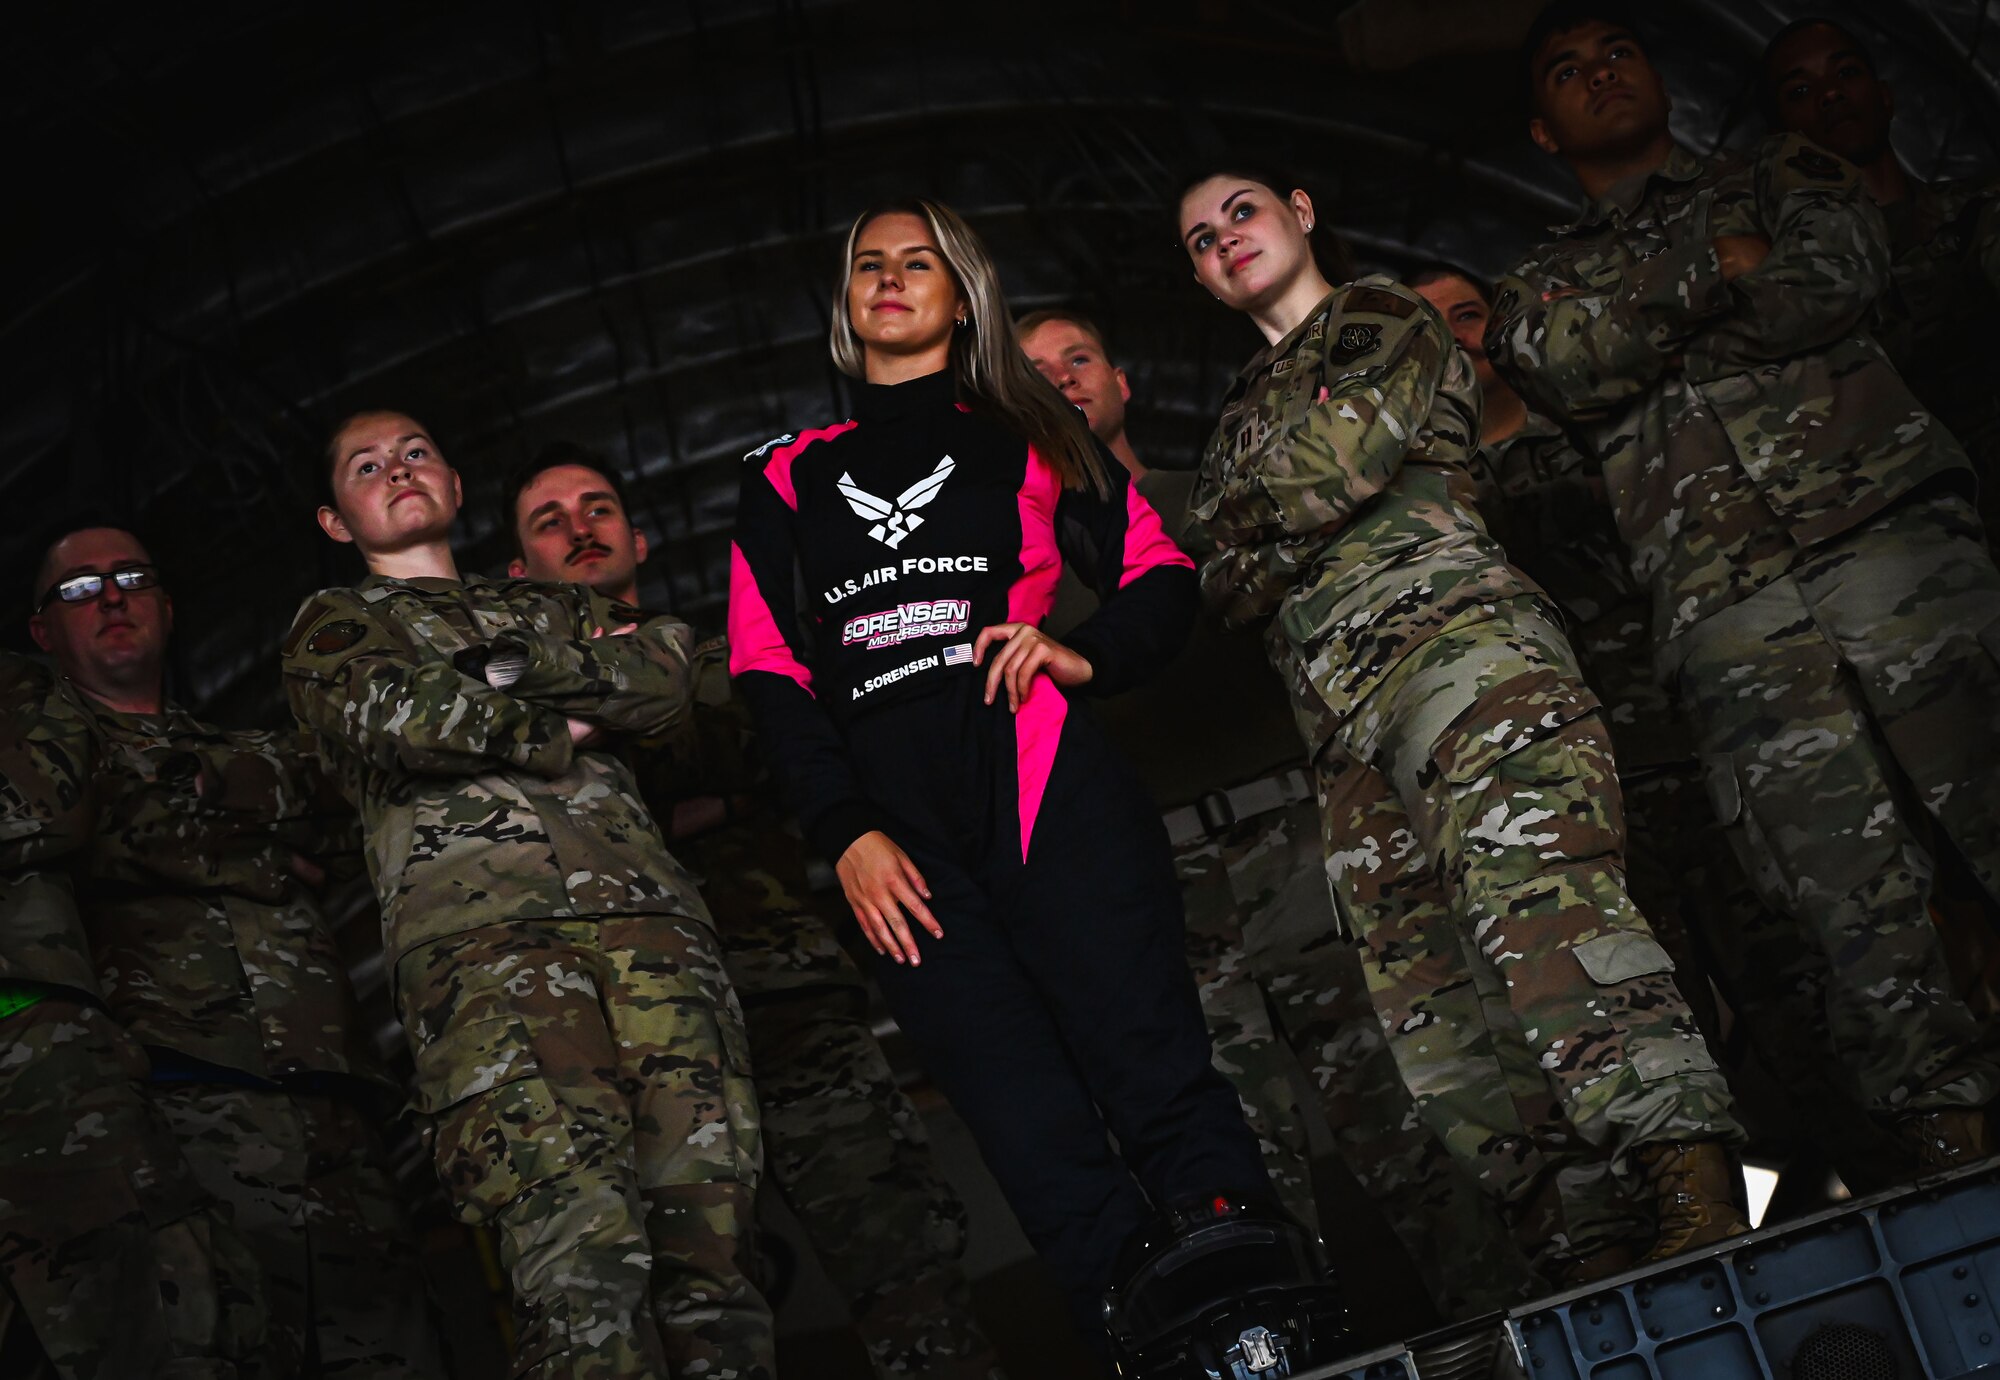 Formula Drift driver Amanda Sorenson poses for a group photo with Airmen from the 305th Air Mobility Wing at Joint Base McGuire-Dix-Lakehurst on June 7, 2022. Drift team duo Branden and Amanda Sorensen visited JB MDL to interact with Airmen and learn about different Air Force career fields. Air Force Recruiting Service recently continued their 13-year partnership with the Formula Drift series. Throughout the 2022 Formula Drift circuit, the Air Force will serve as the primary sponsor for the Sorensen Motorsports team.